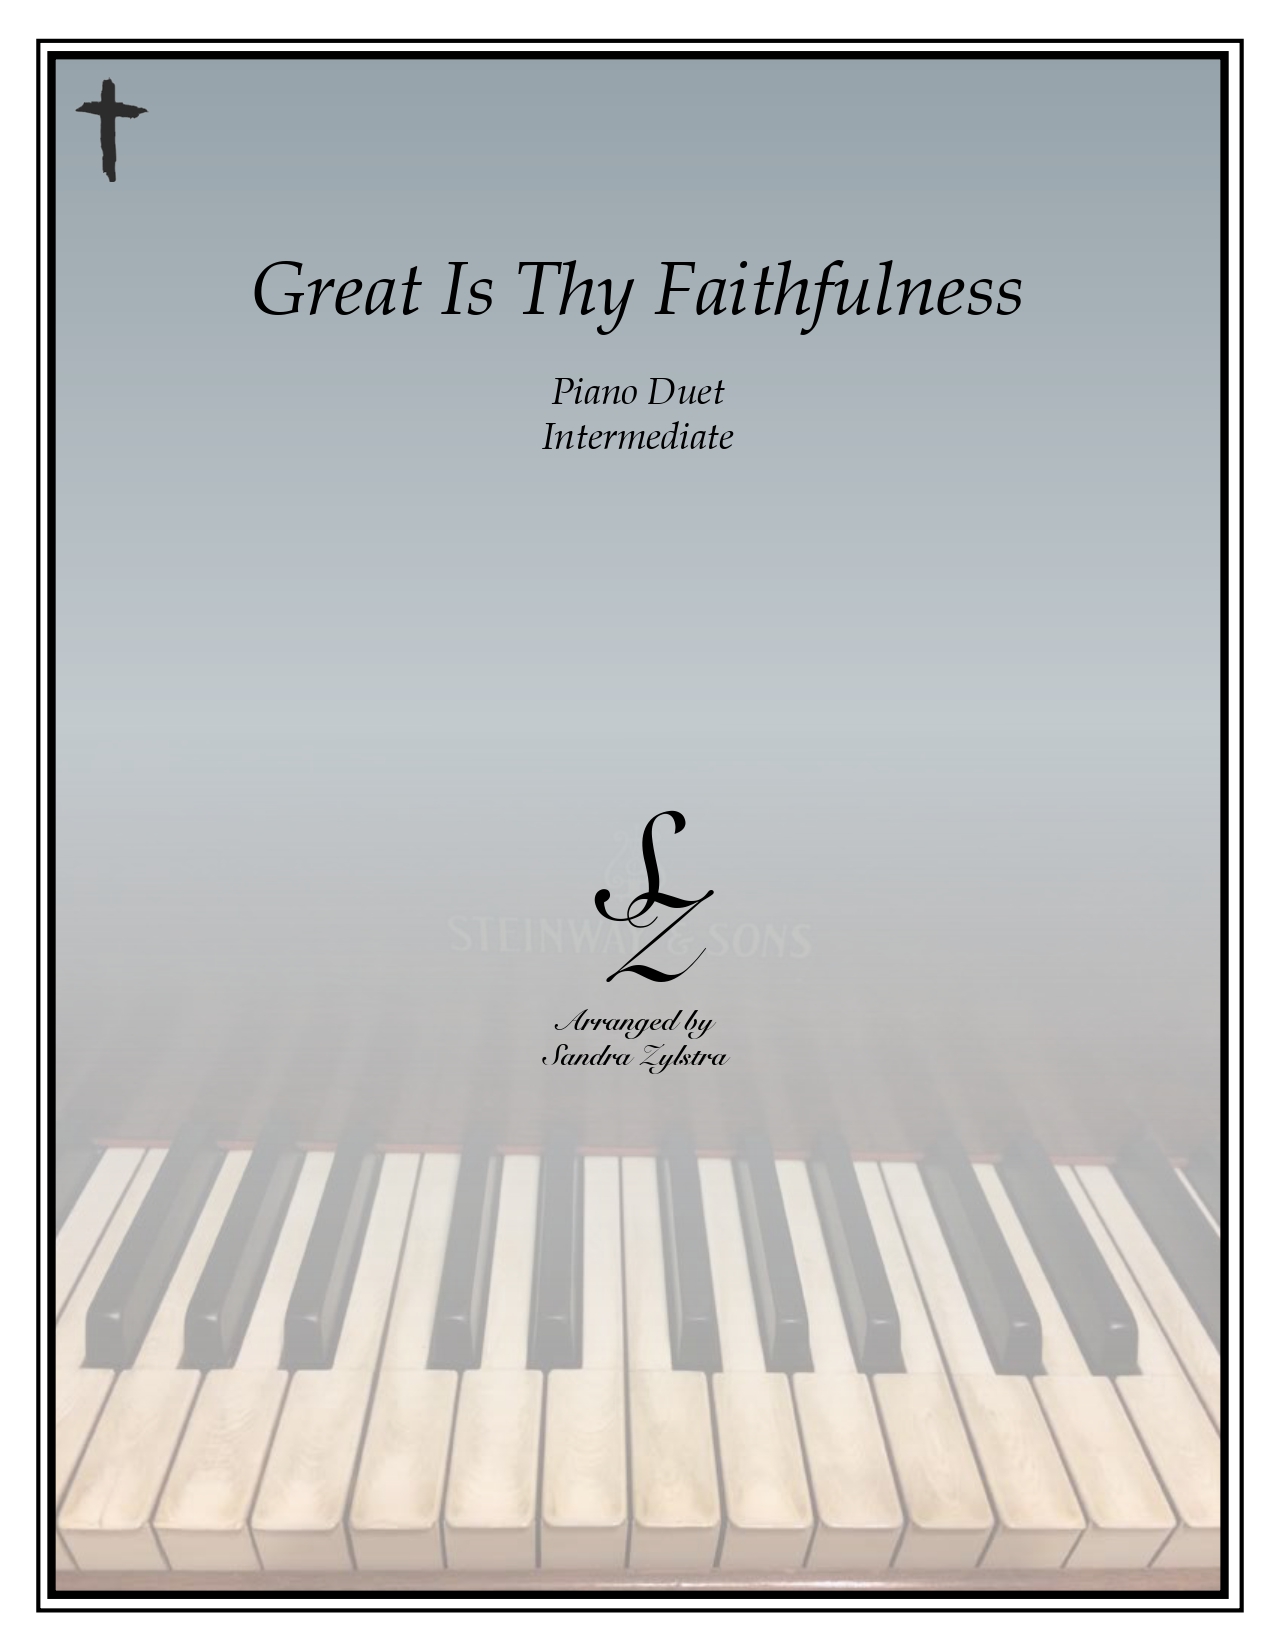 Great Is Thy Faithfulness intermediate duet cover page 00011